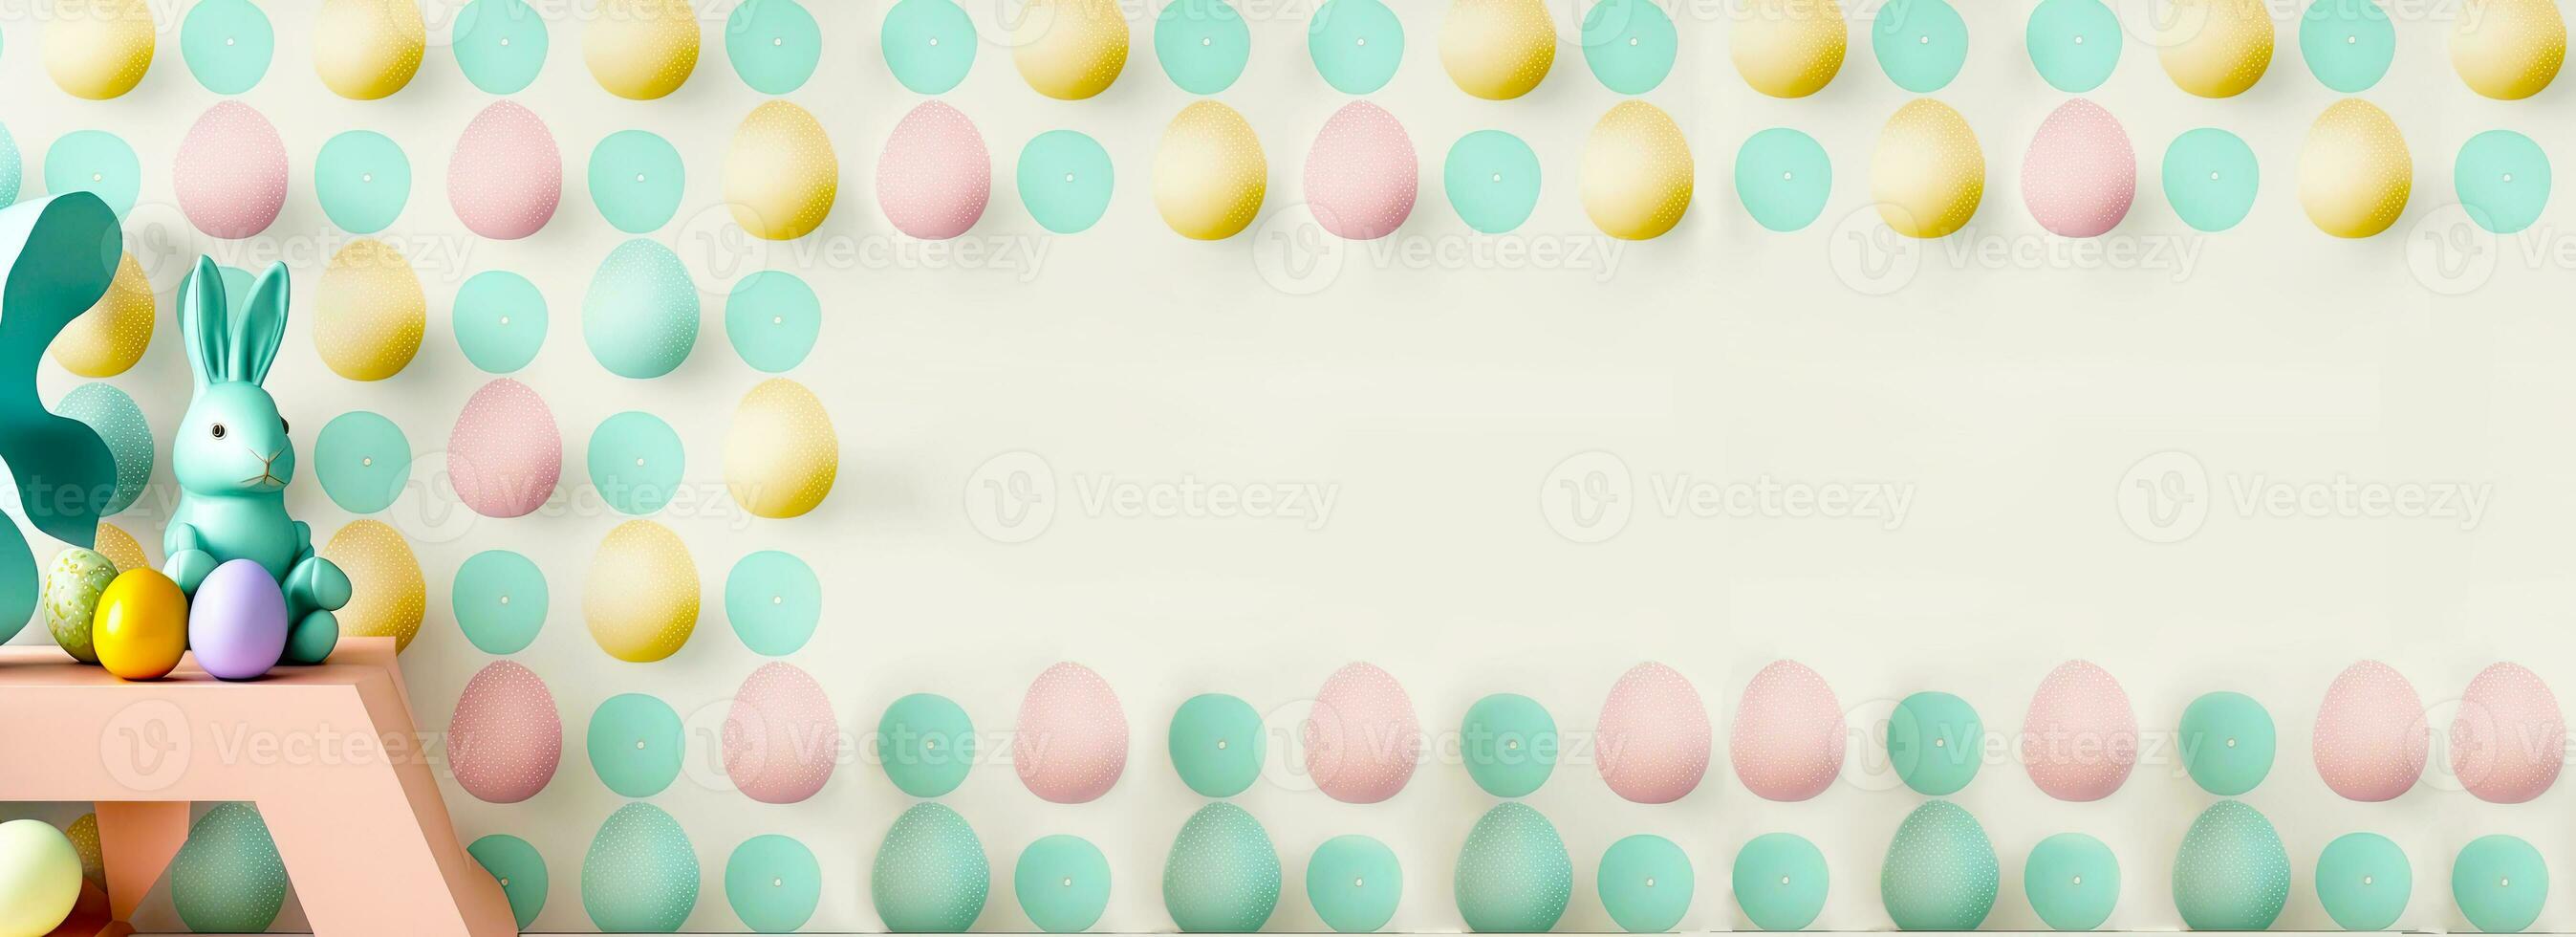 3D Render of Cute Rabbit Character Sitting On Podium Against Colorful Easter Eggs Pattern Background And Copy Space. Easter Day Concept. photo